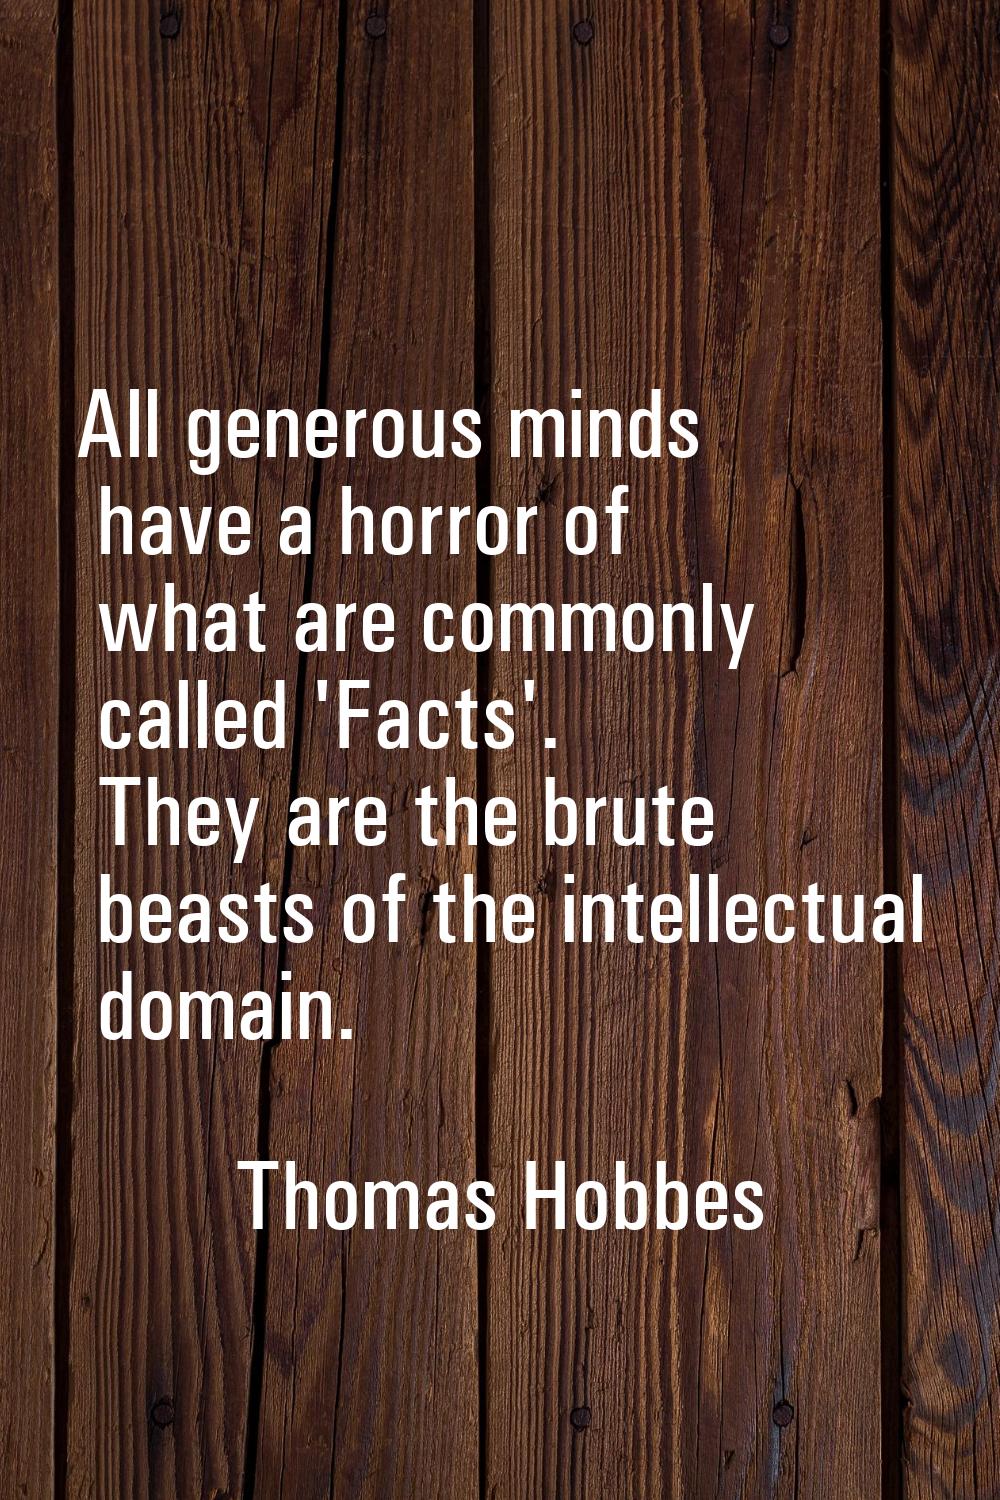 All generous minds have a horror of what are commonly called 'Facts'. They are the brute beasts of 